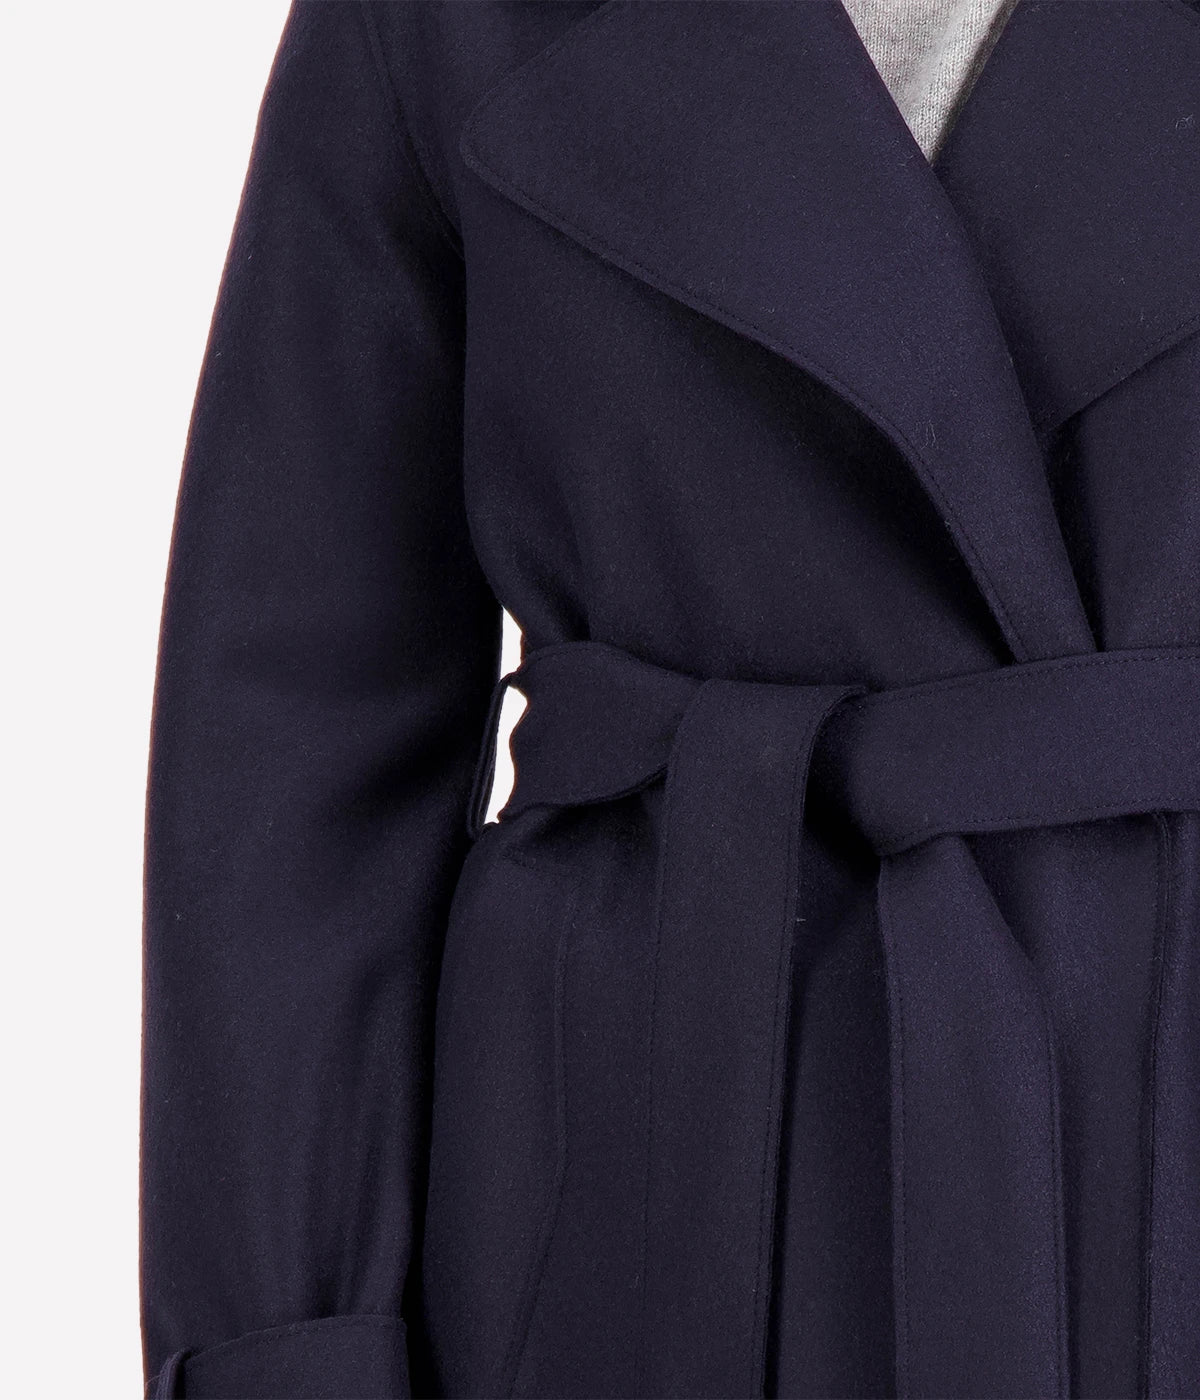 Double Vent Trench Coat in Navy Blue